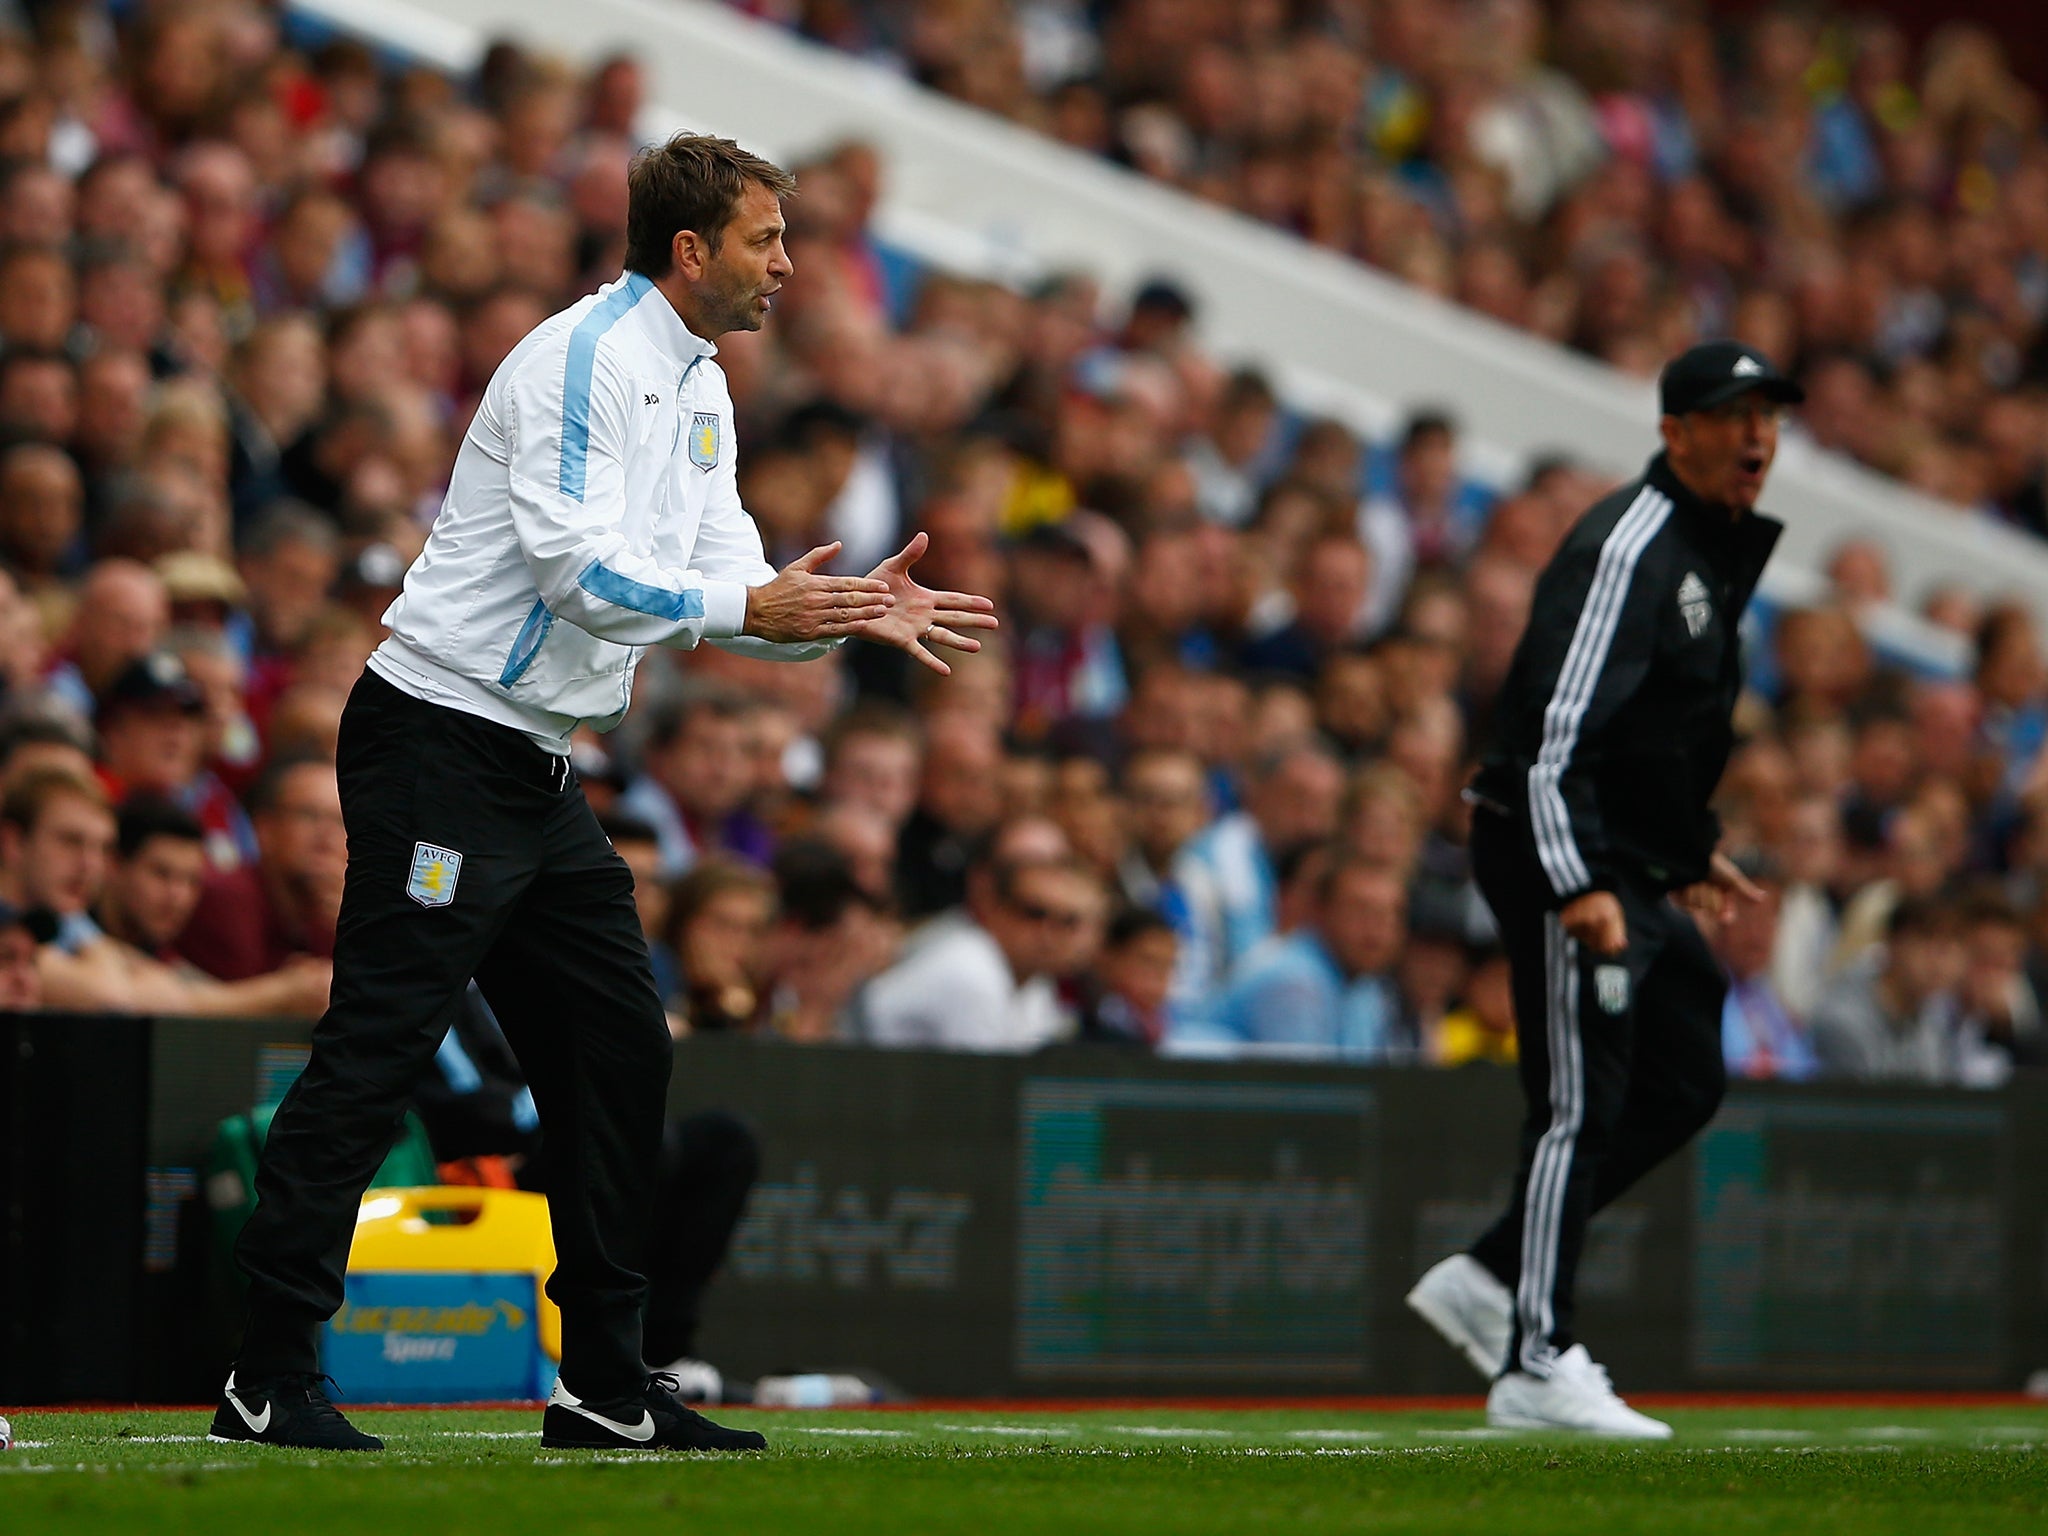 Tim Sherwood and Tony Pulis watch the action